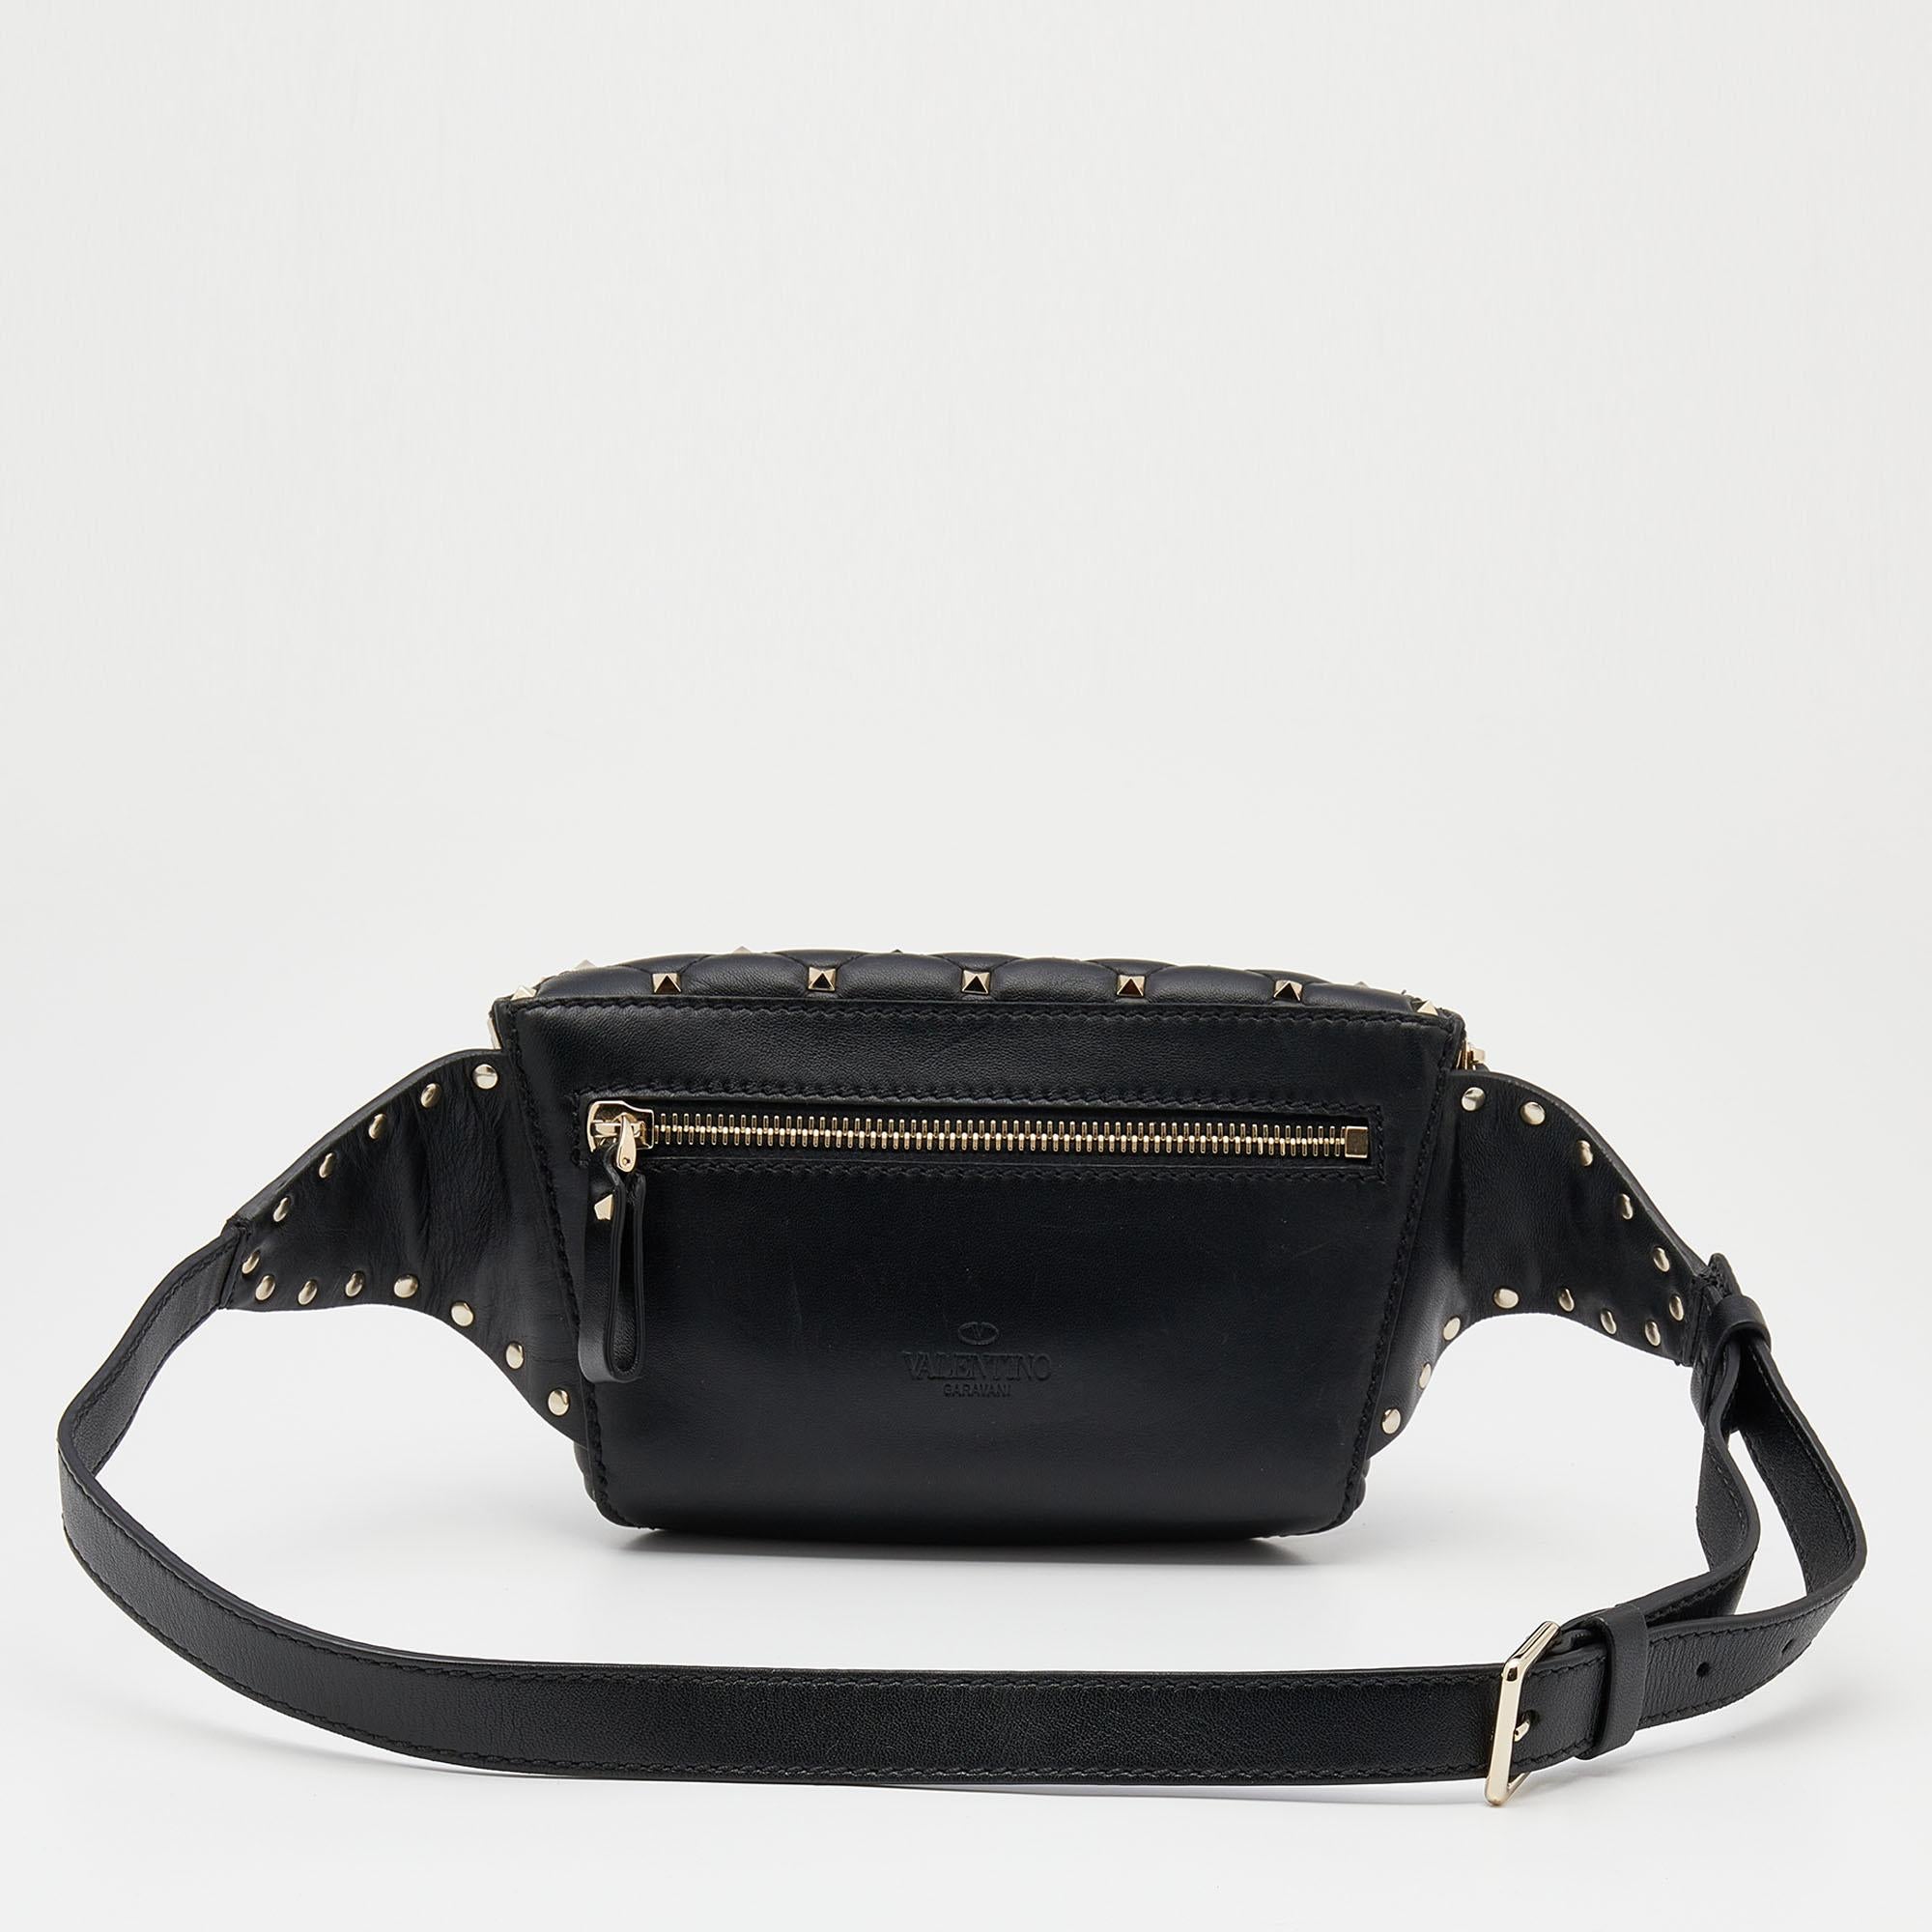 How cute is this belt bag from the House of Valentino! Fashioned in black leather, this belt bag is accentuated with Rockstud embellishments throughout. It flaunts a zipper on the front, which leads us to the leather-lined interior. Gold-tone